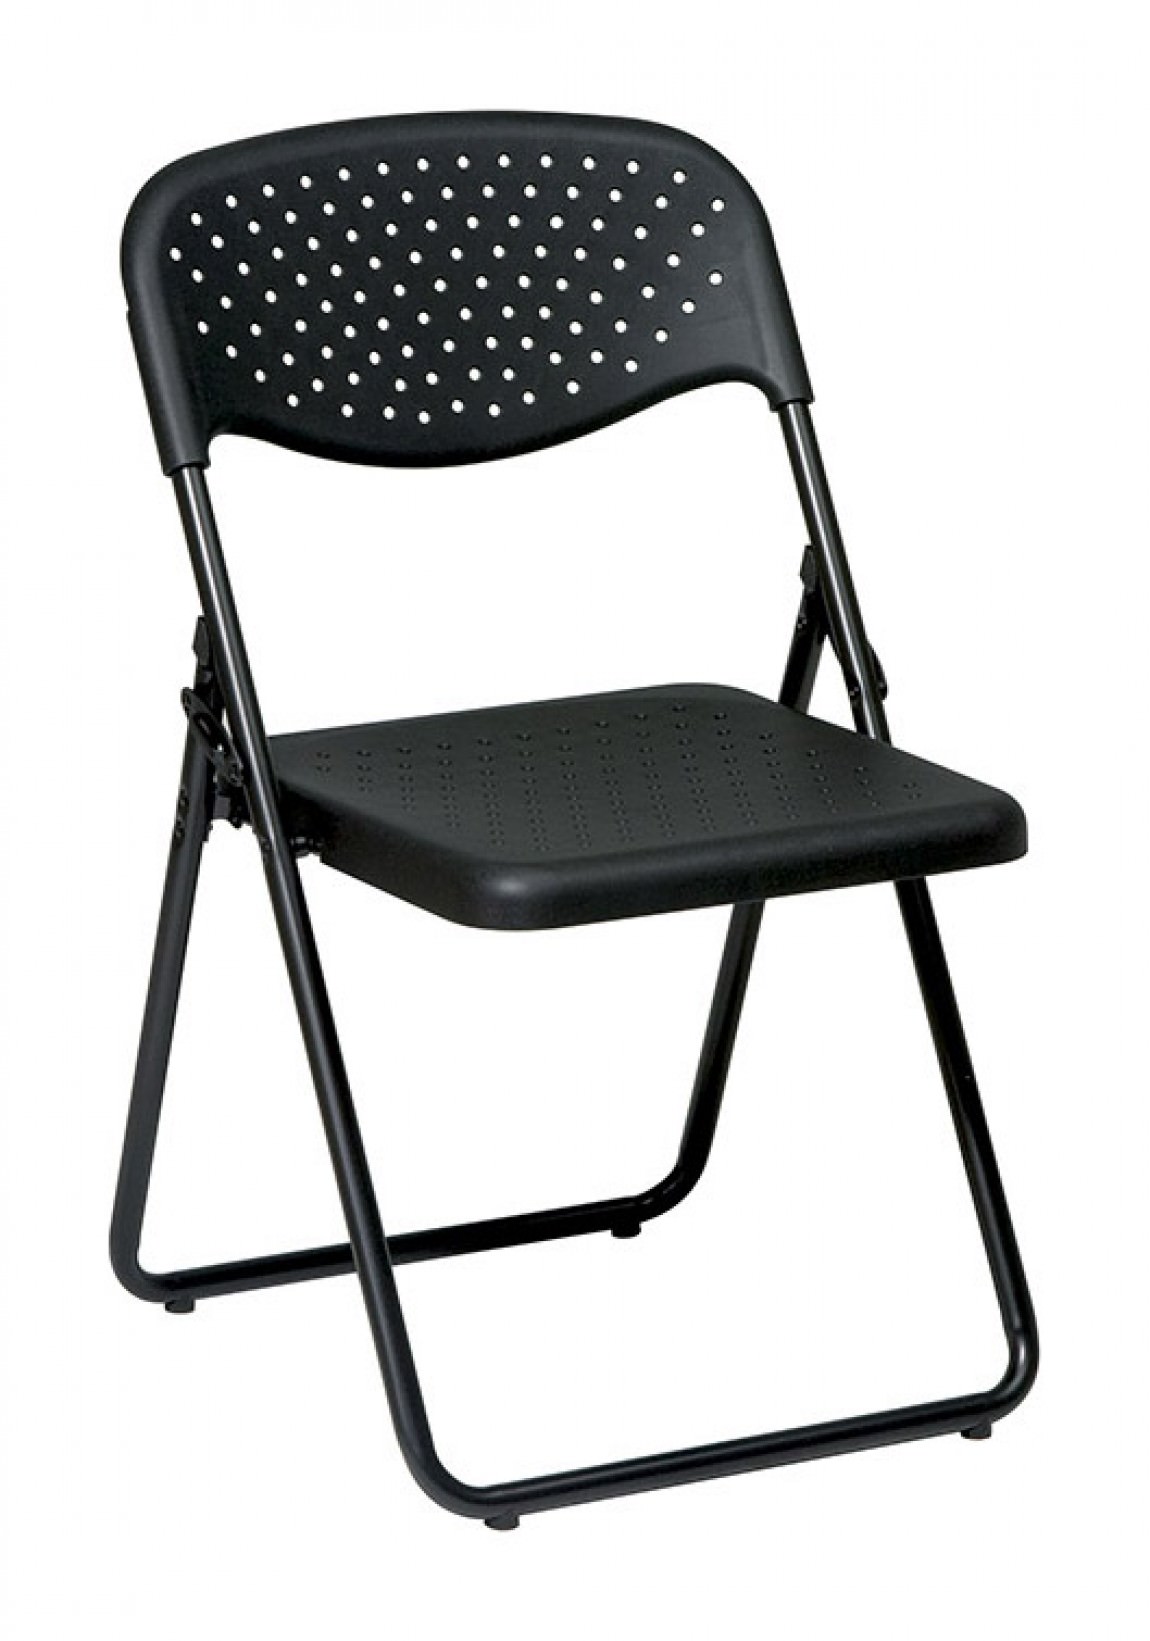 Stackable Folding Chair - 4 Pack